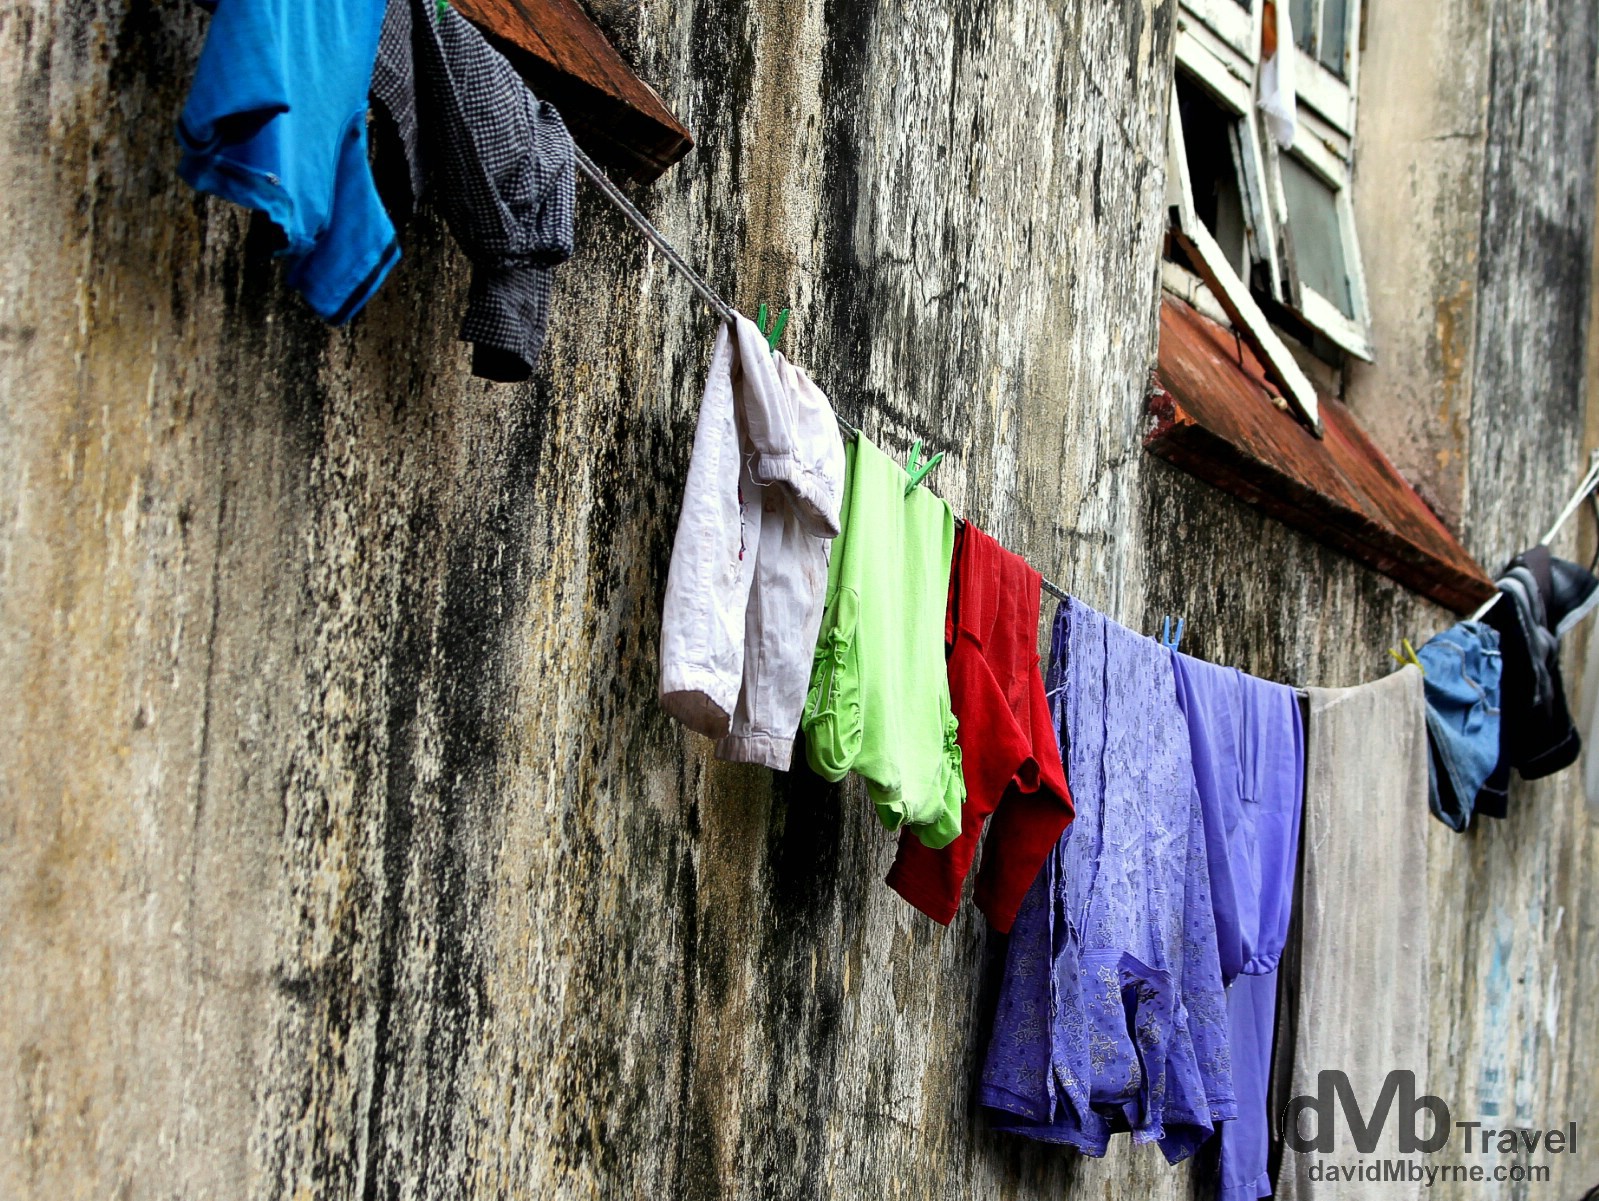 Laundry hanging outside a building in a lane of Galle’s Fort, Galle, southern Sri Lanka. September 2nd 2012.